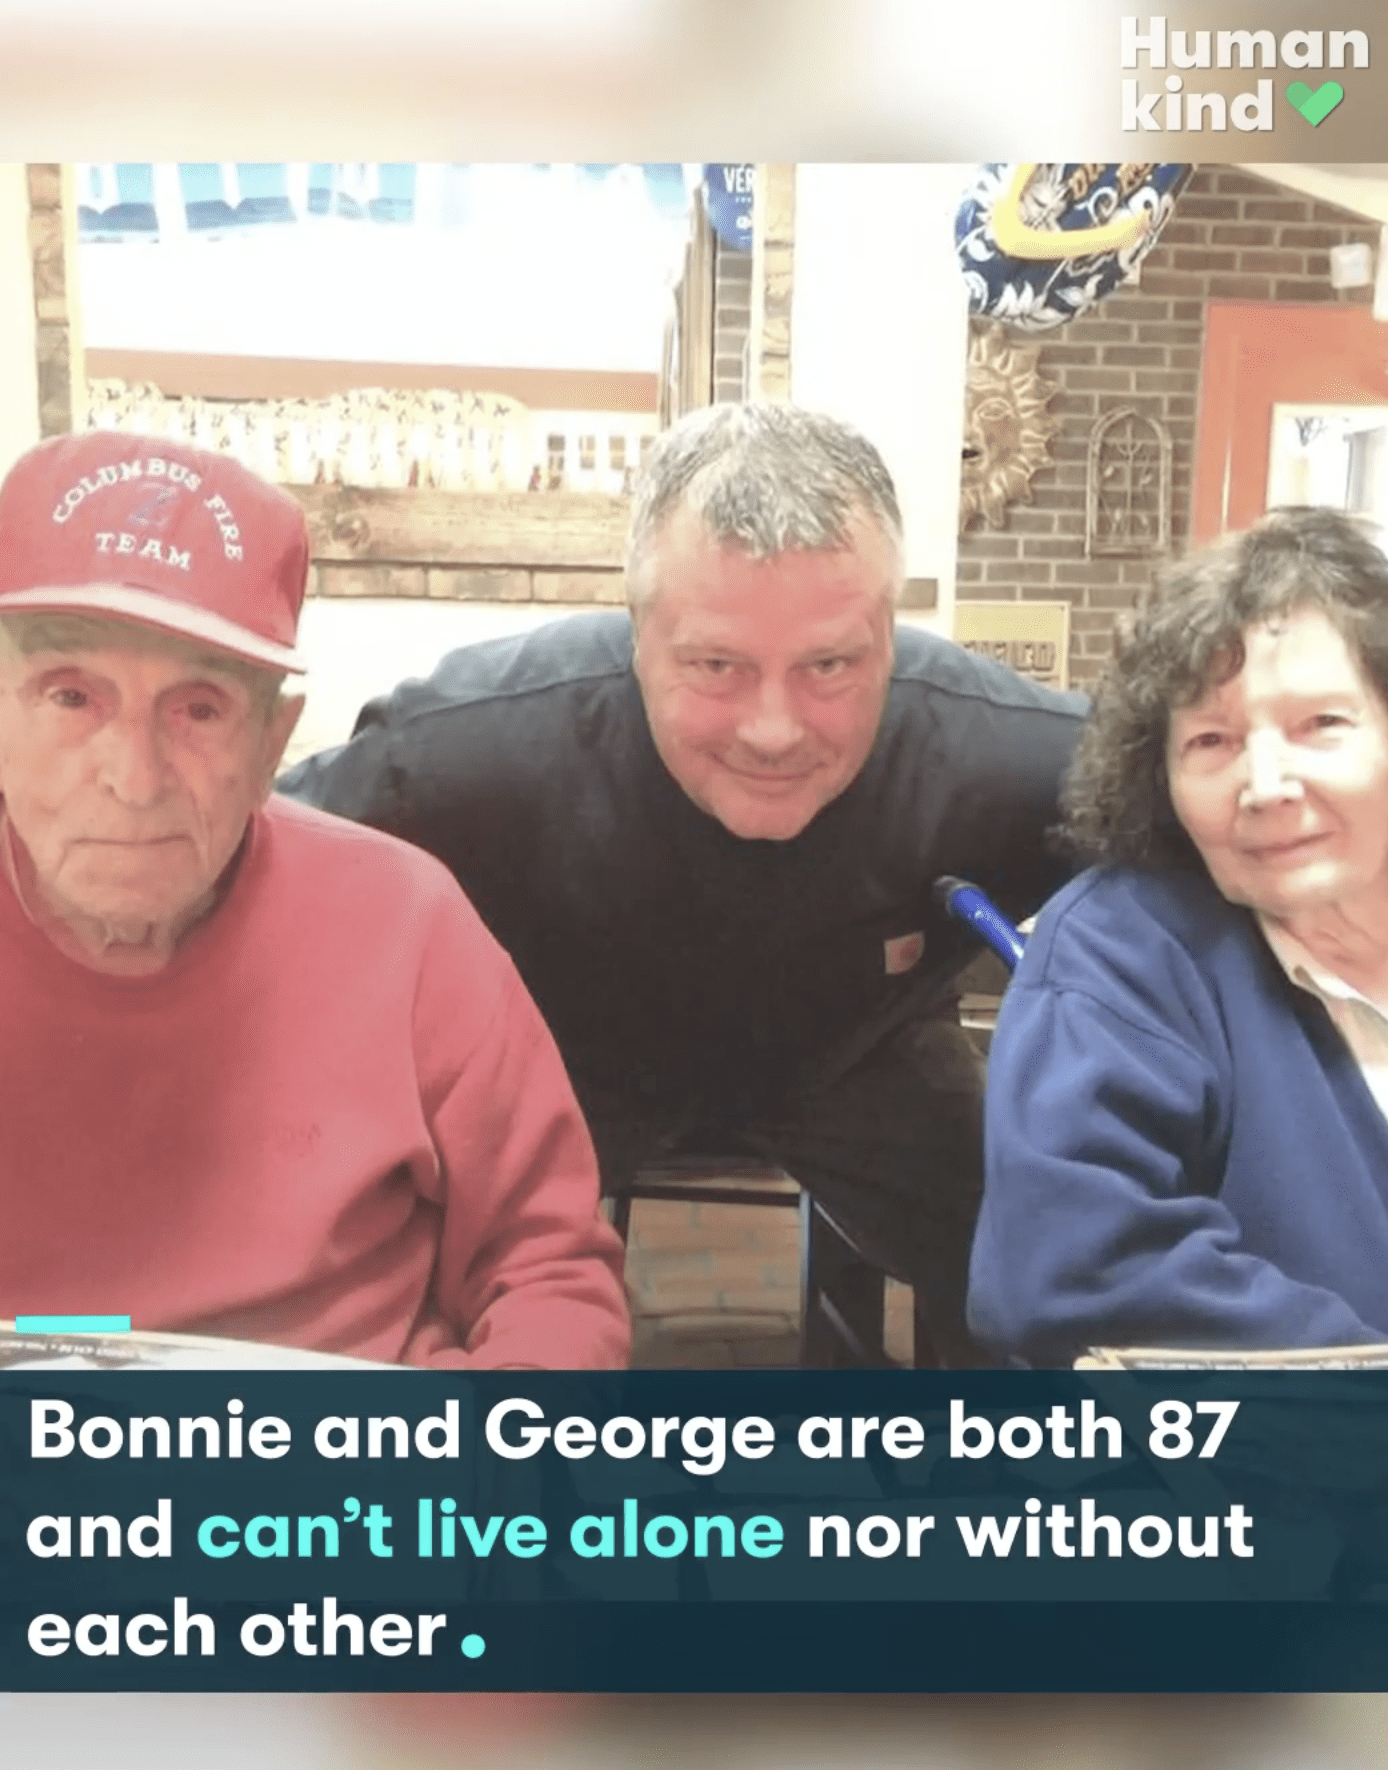 Schon pictured with his parents, Bonnie and George Miller. | Photo: Facebook.com/northjerseycom